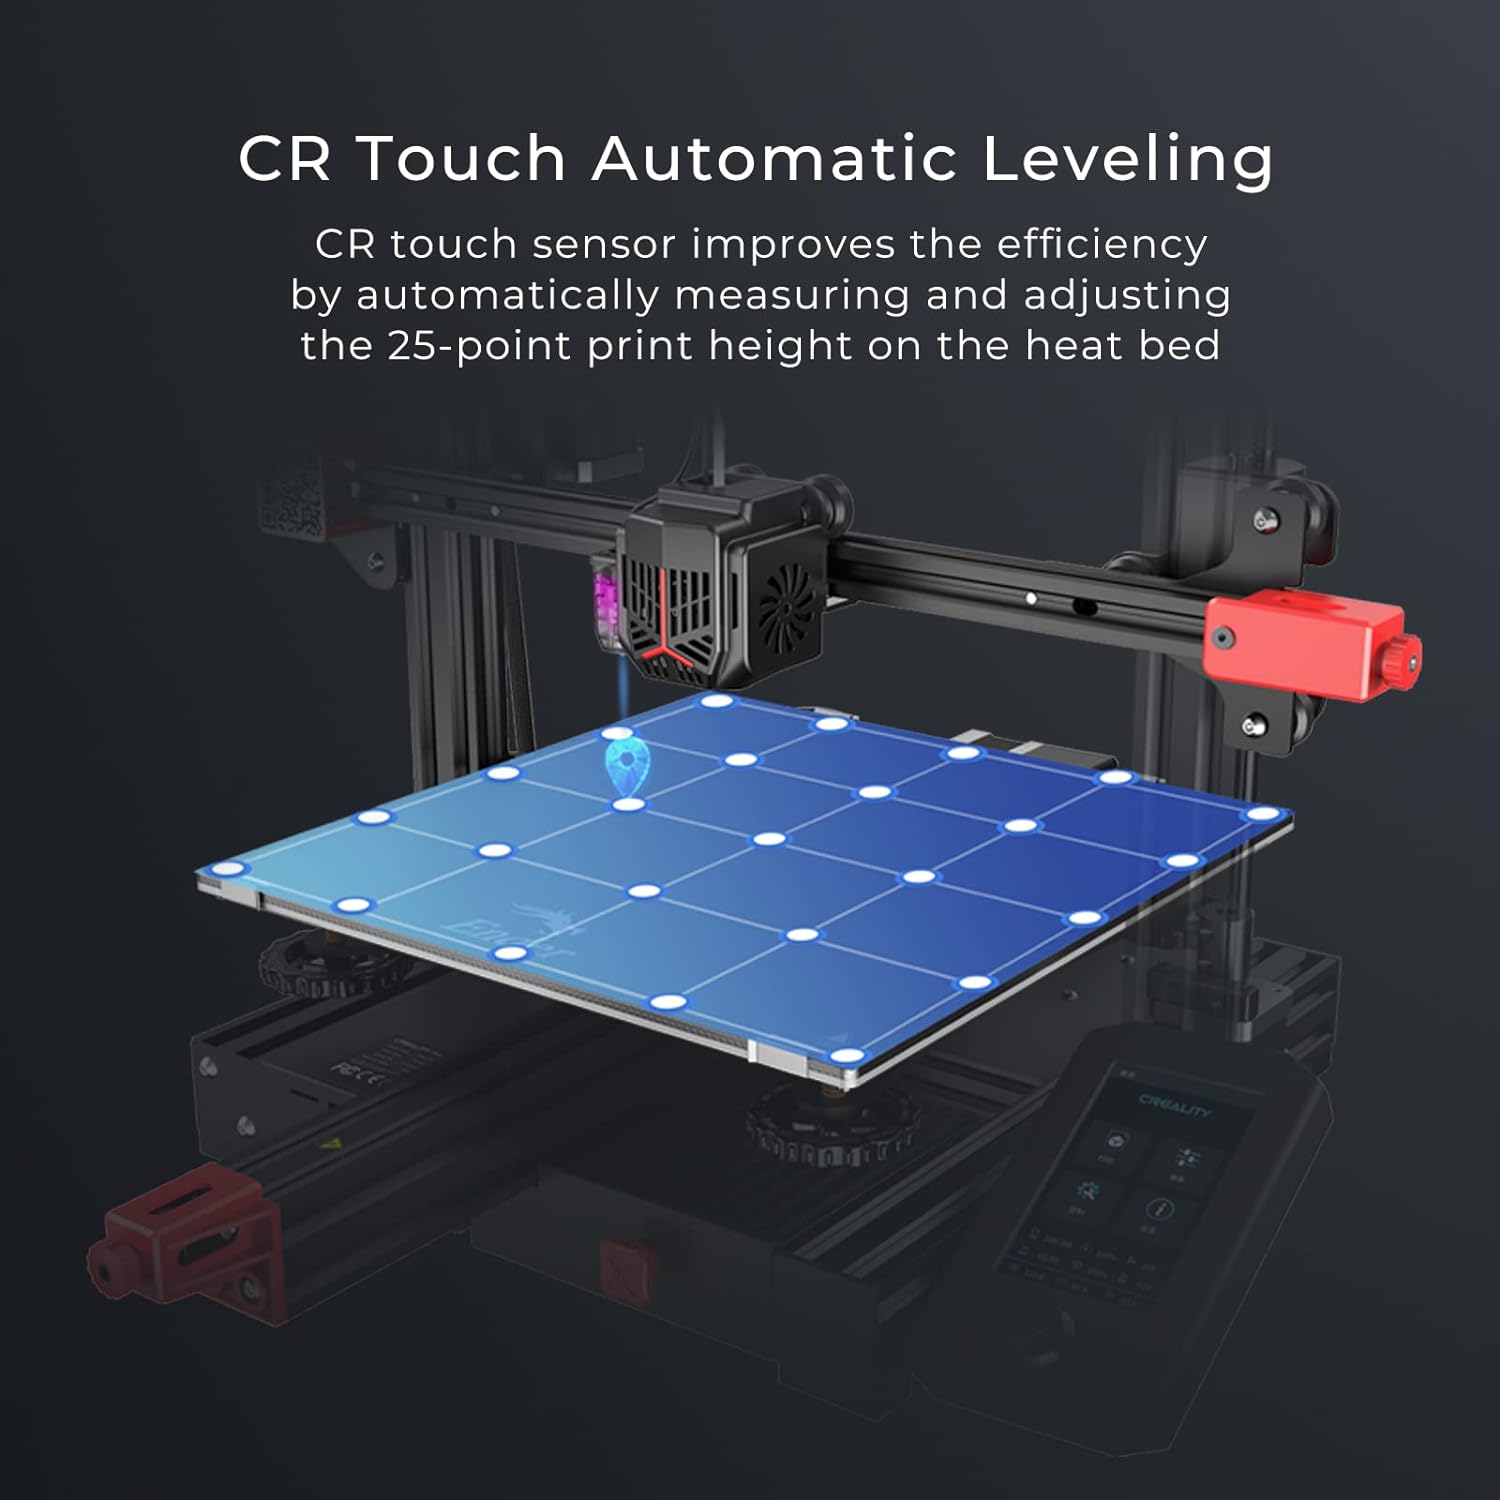 creality-ender-3-max-neo-3d-printer-cr-touch-auto-leveling-dual-z-axis-full-metal-extruder-silent-mainboard-filament-sen-2 Creality Ender 3 Max Neo 3D Printer Review